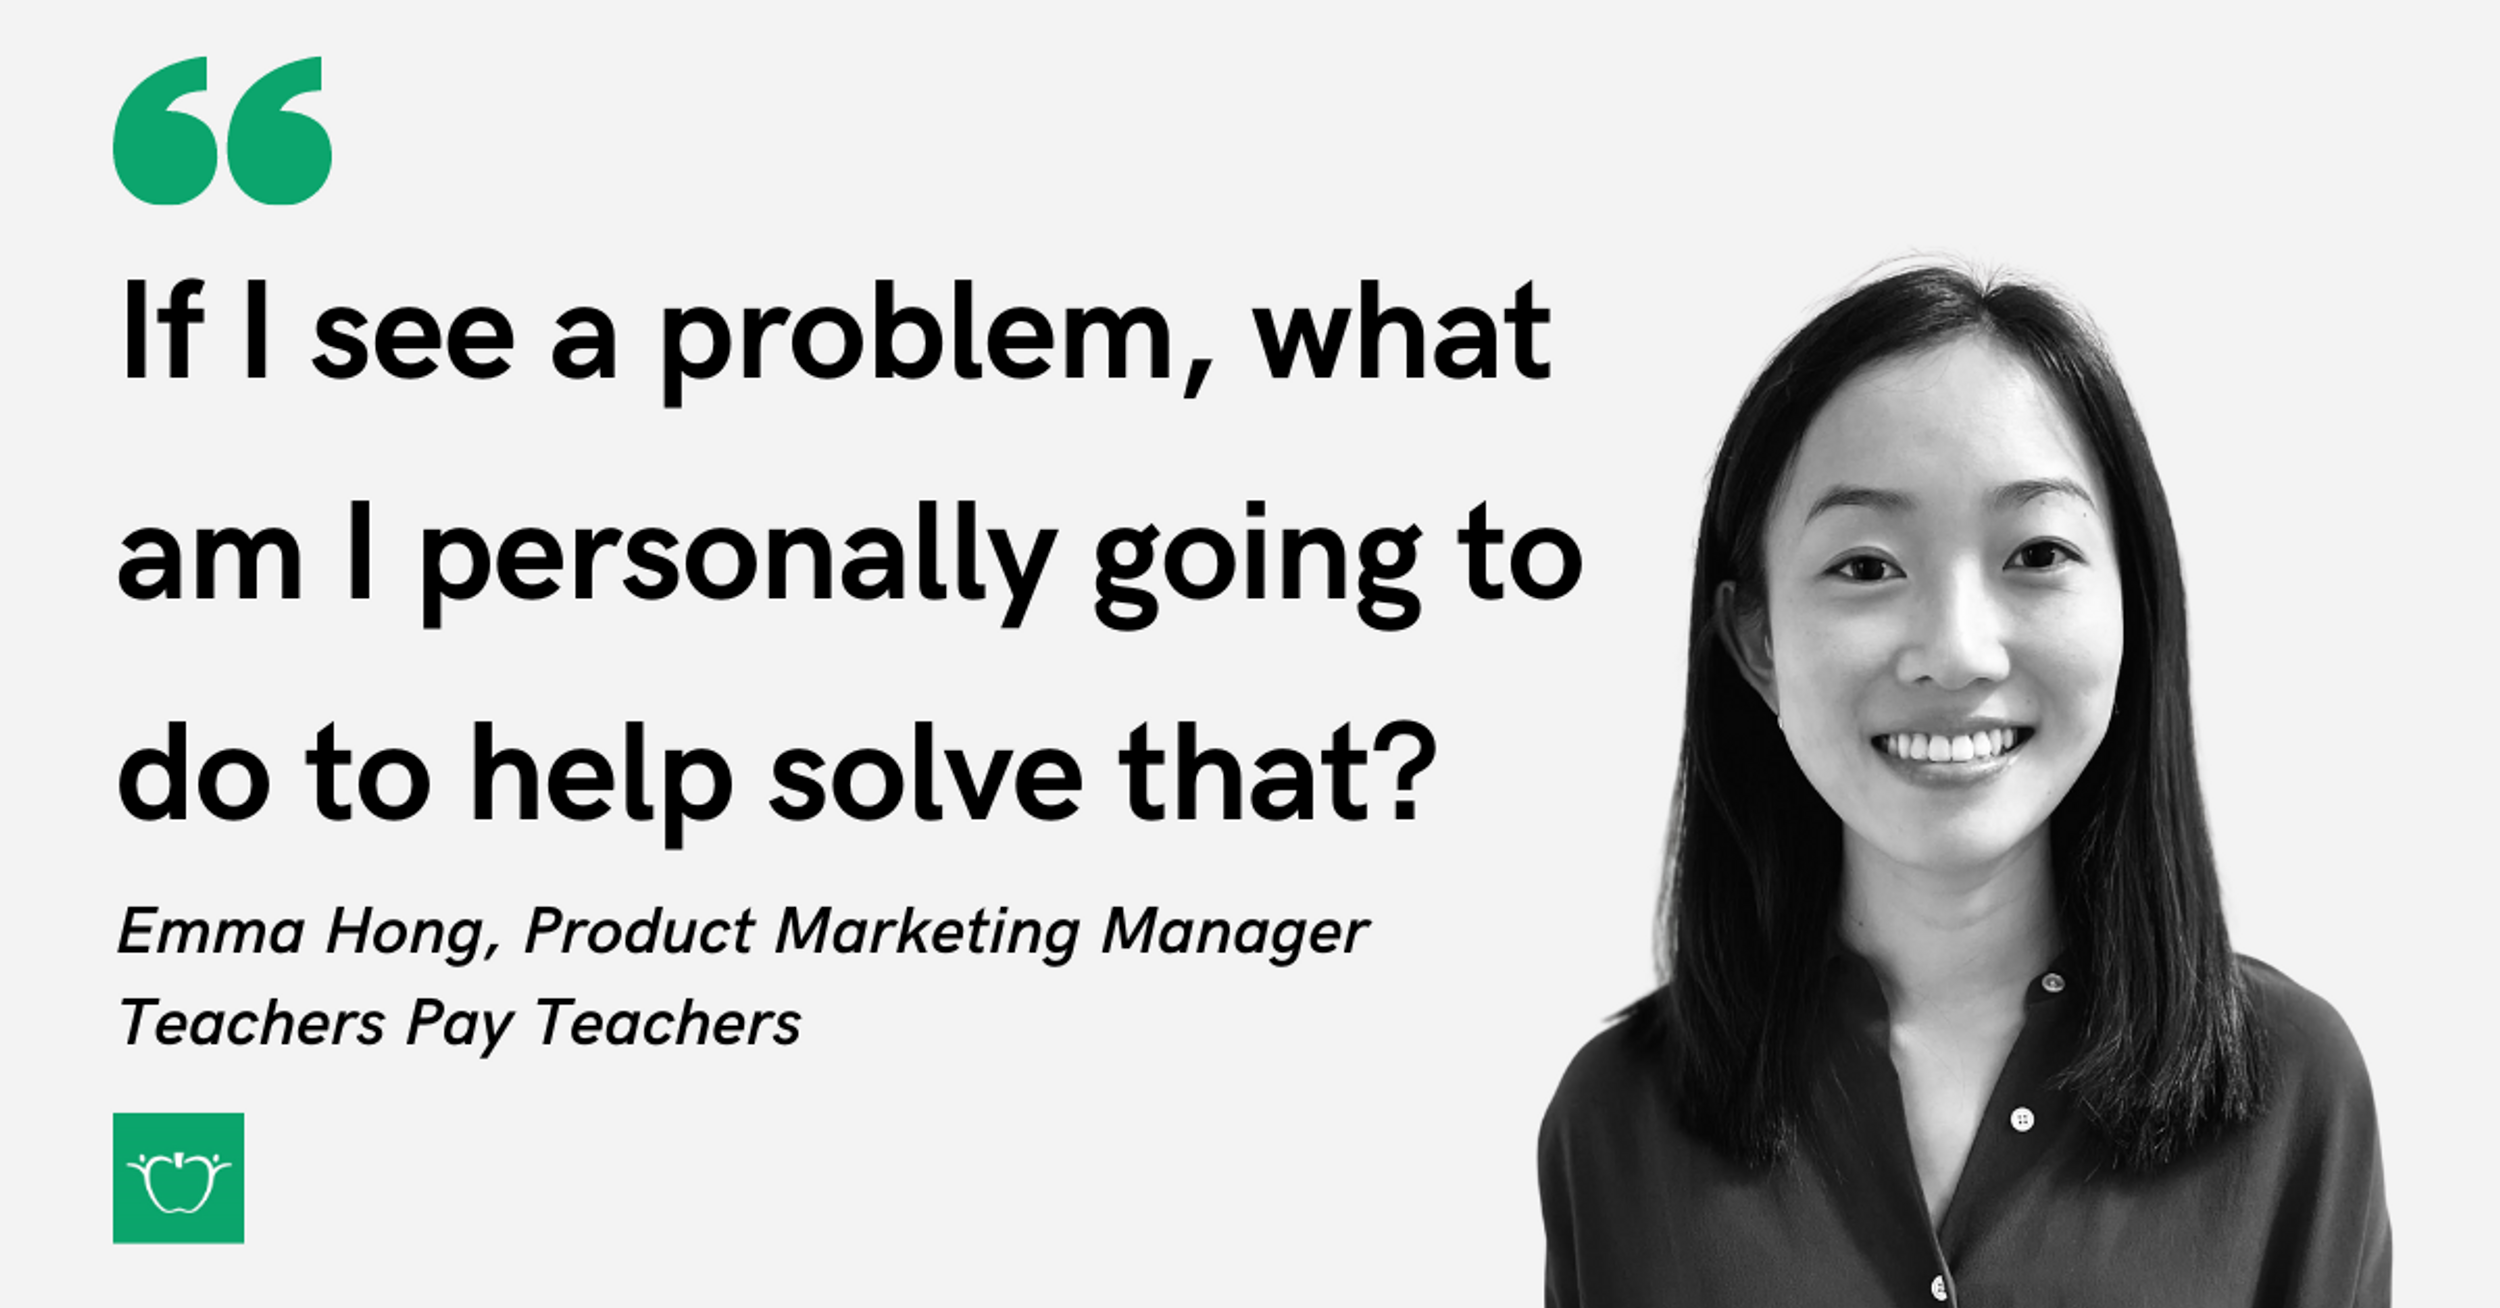 Blog post header with quote from Emma Hong, Product Marketing Manager at Teachers Pay Teachers